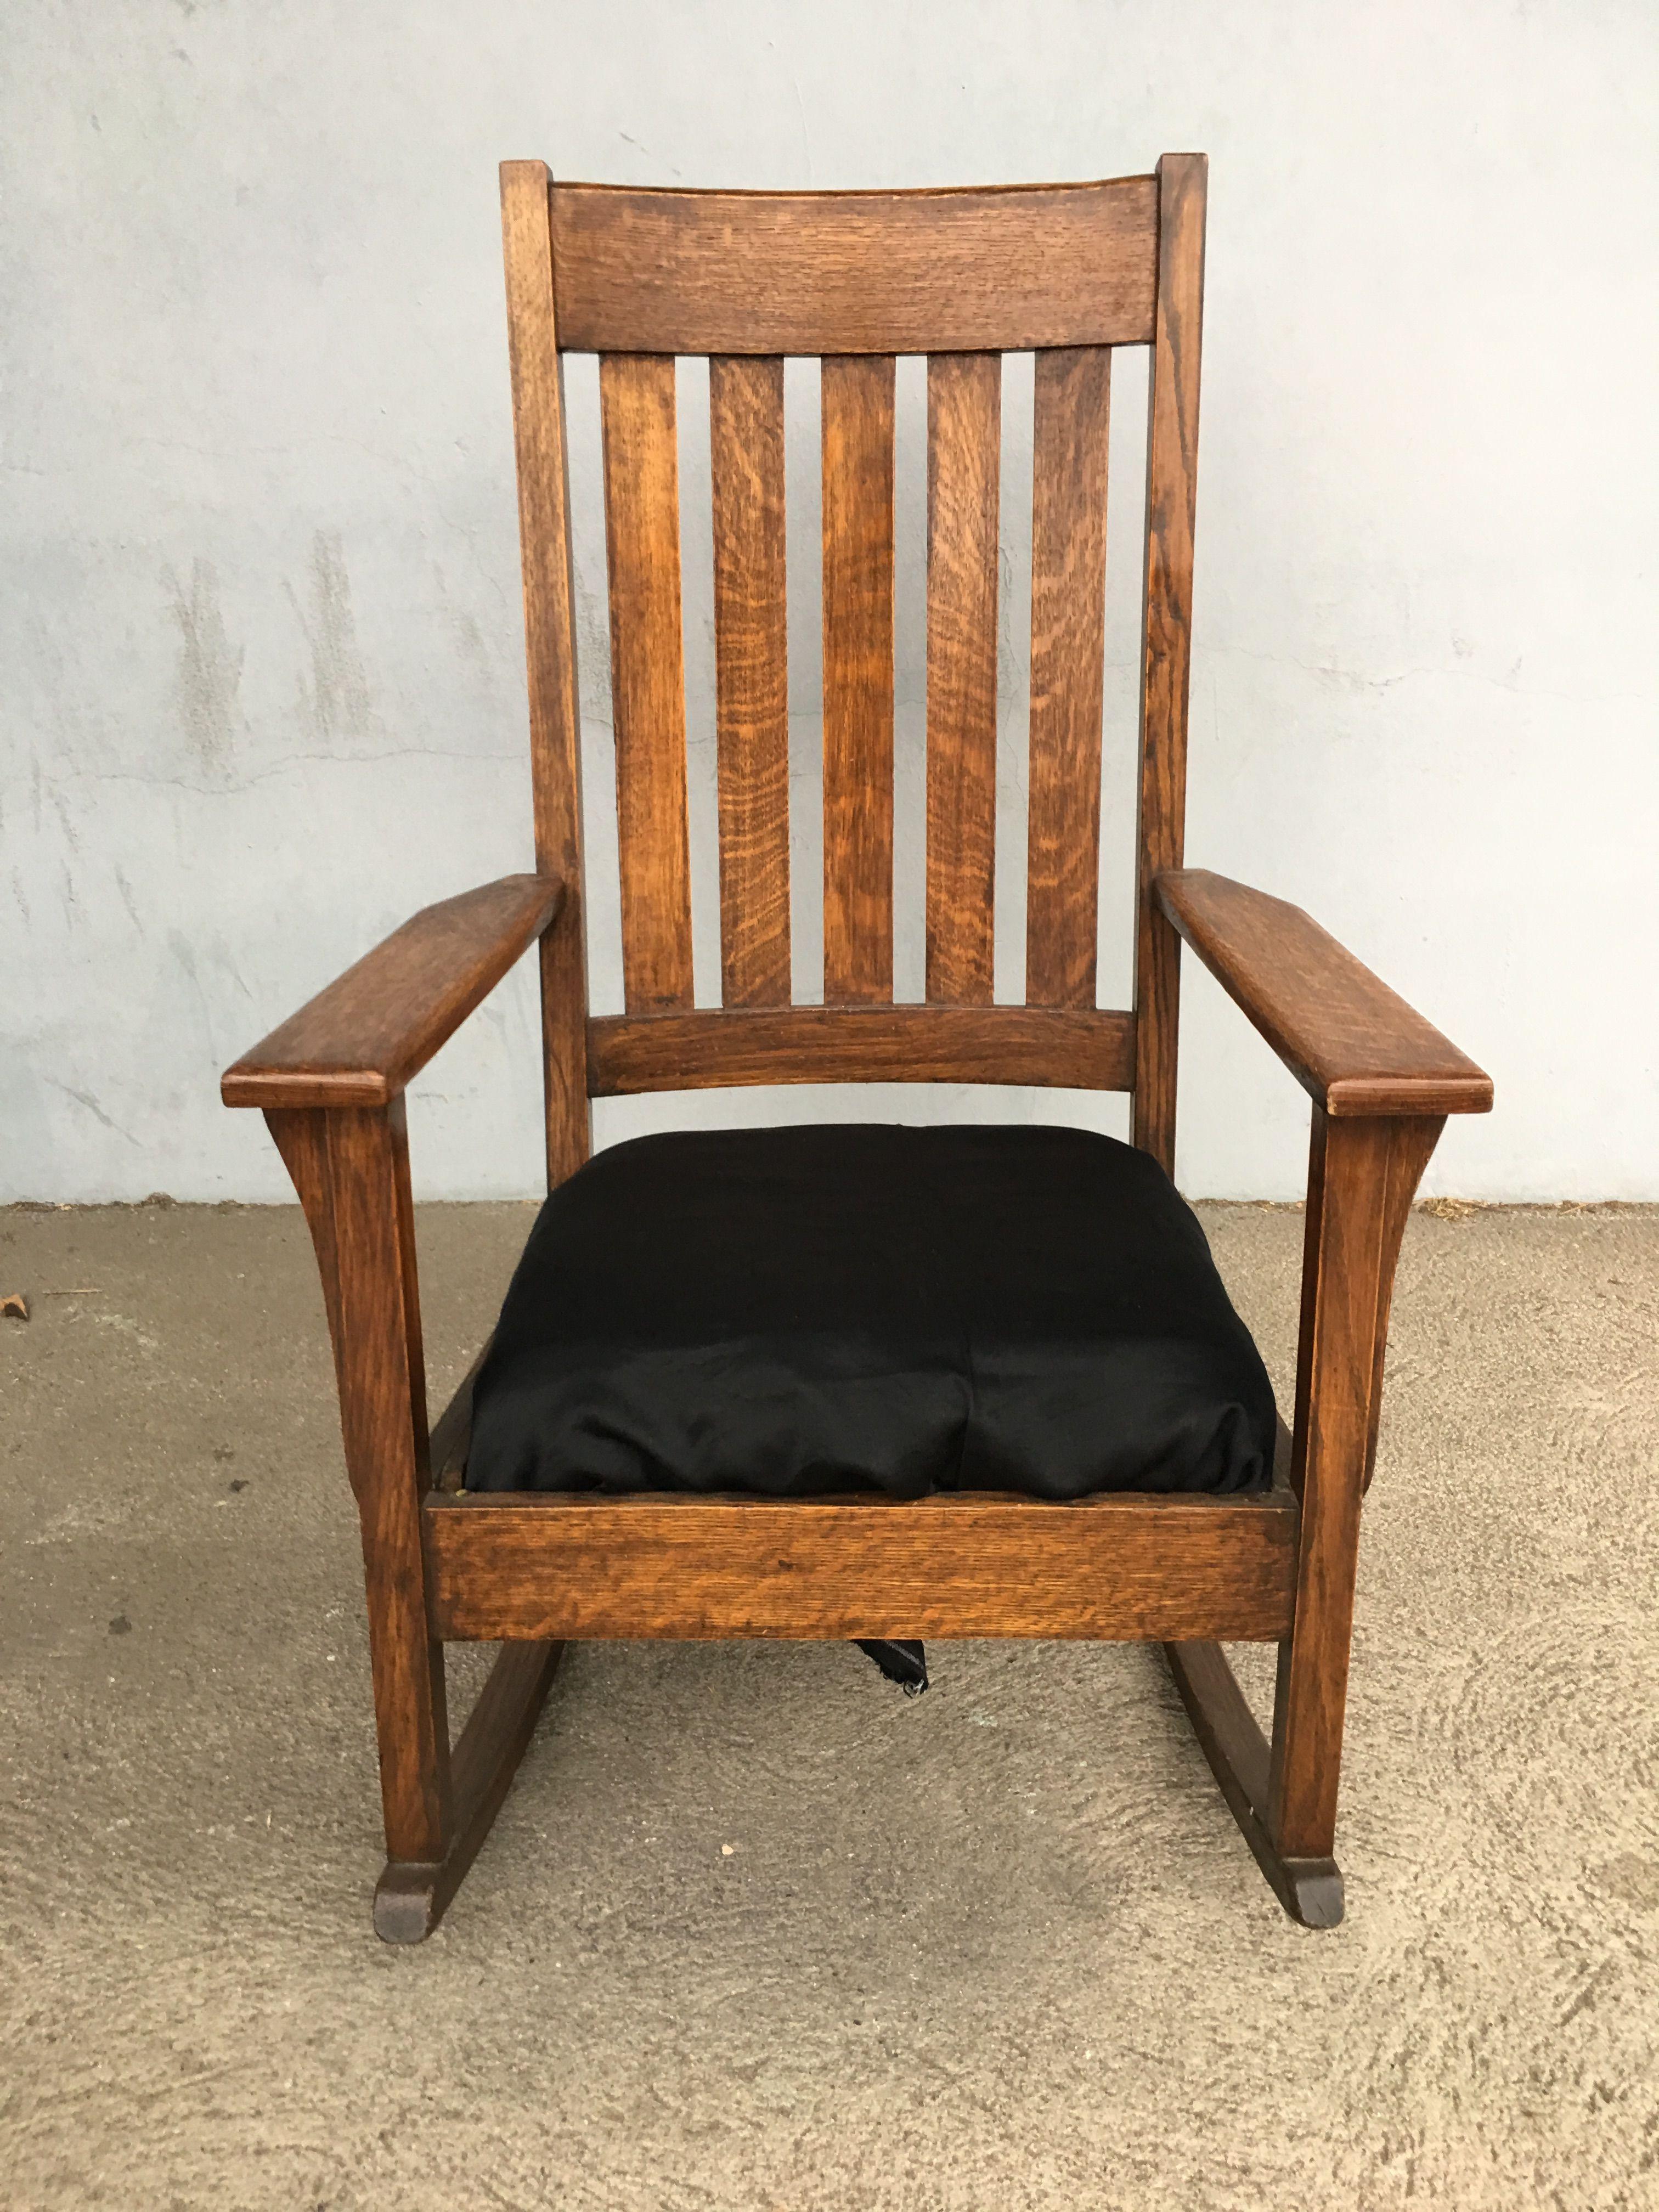 Vintage Chestnut Mission style slat back rocking chair with black leather seat by National Chair Co., circa 1910.